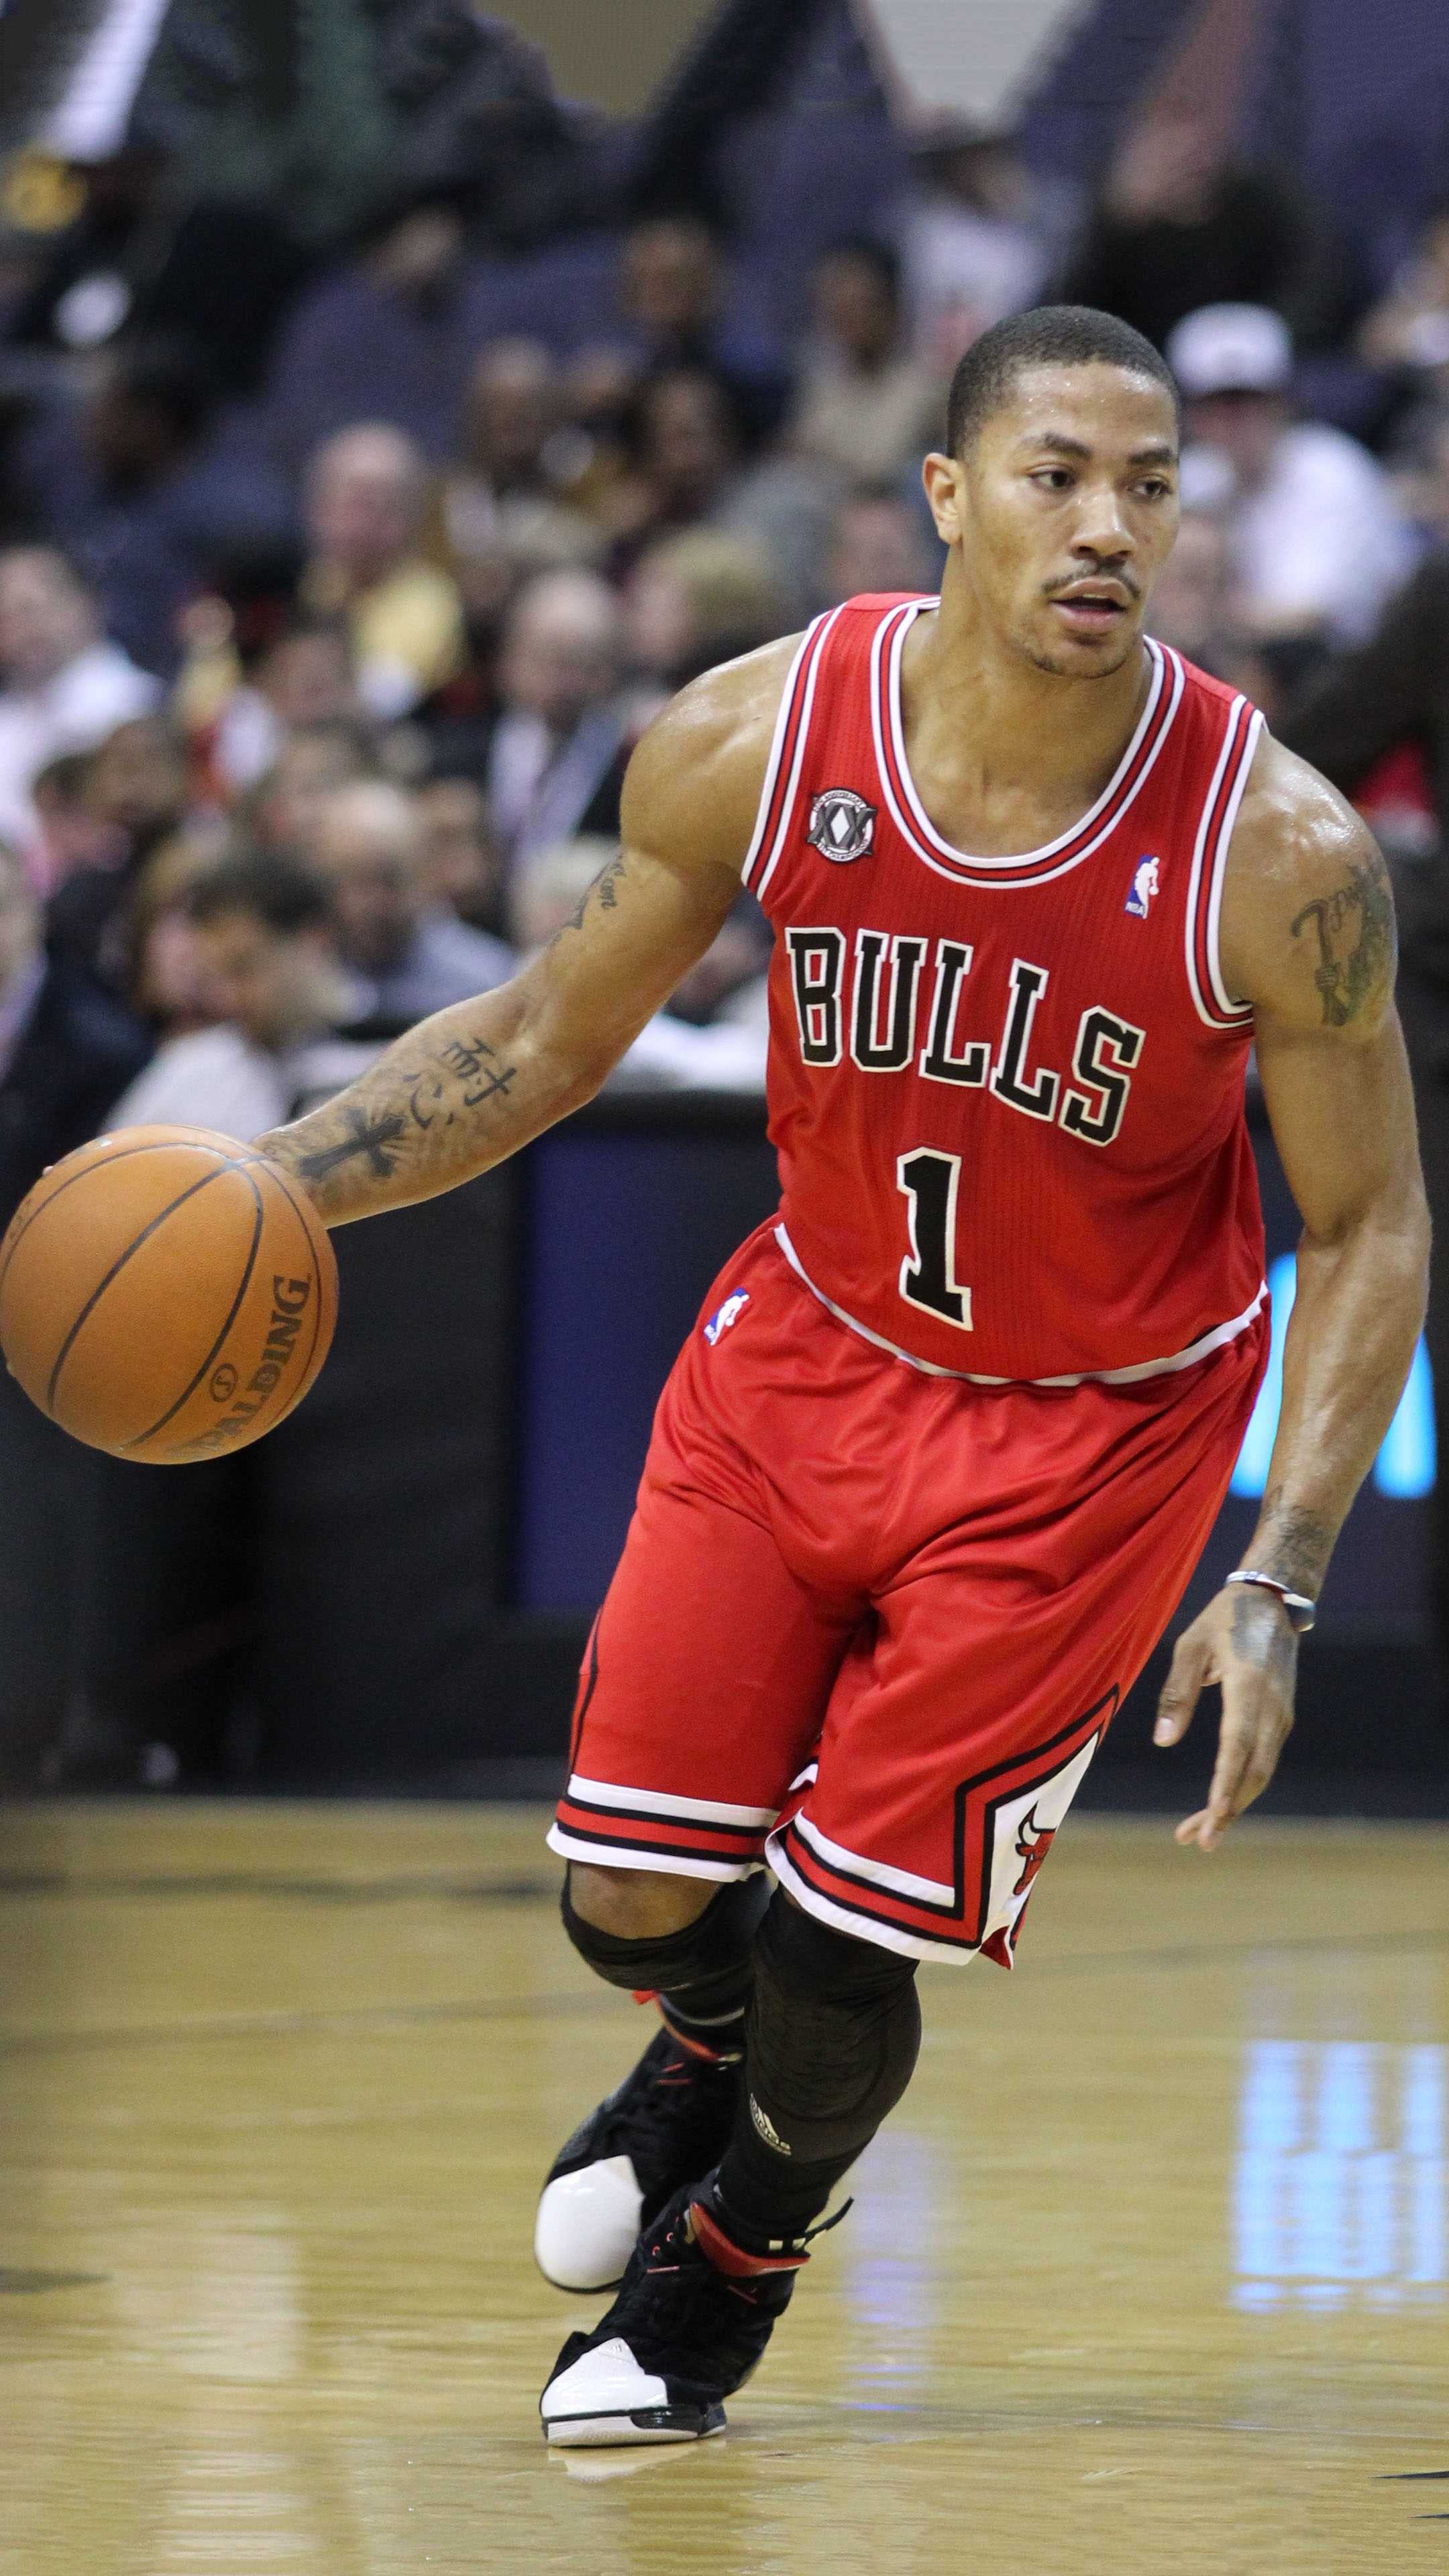 Chicago Bulls: Derrick Rose, The team has won six NBA championships between 1991 and 1998. 2160x3840 4K Background.